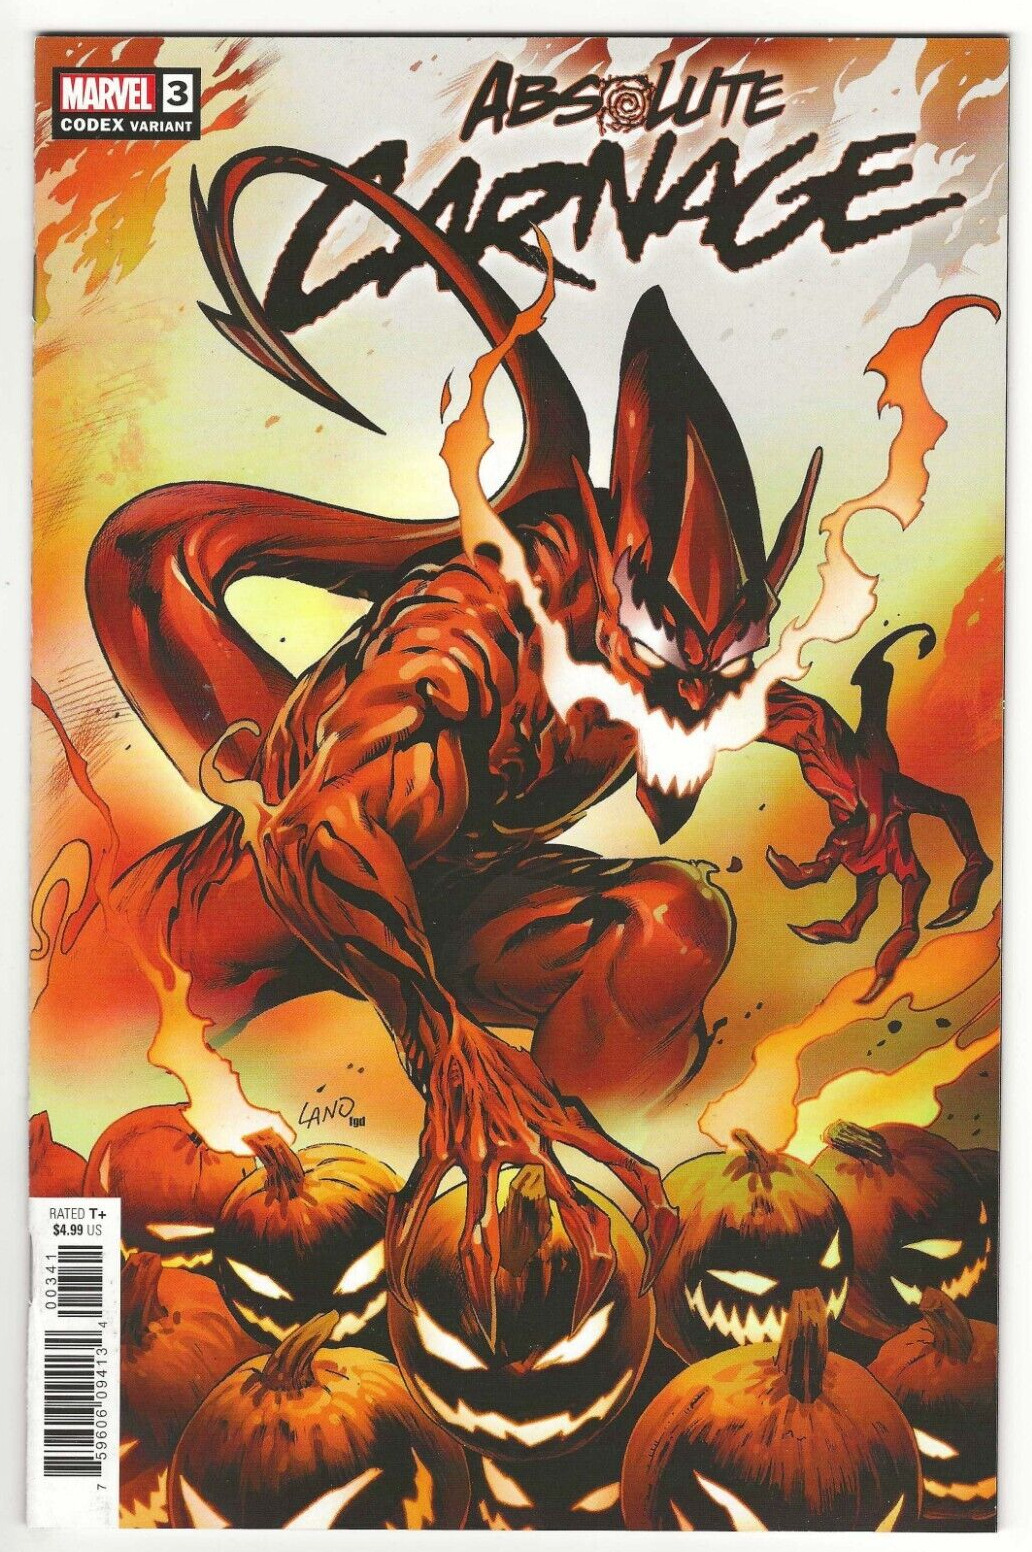 Marvel Comics ABSOLUTE CARNAGE #3 first printing Codex variant